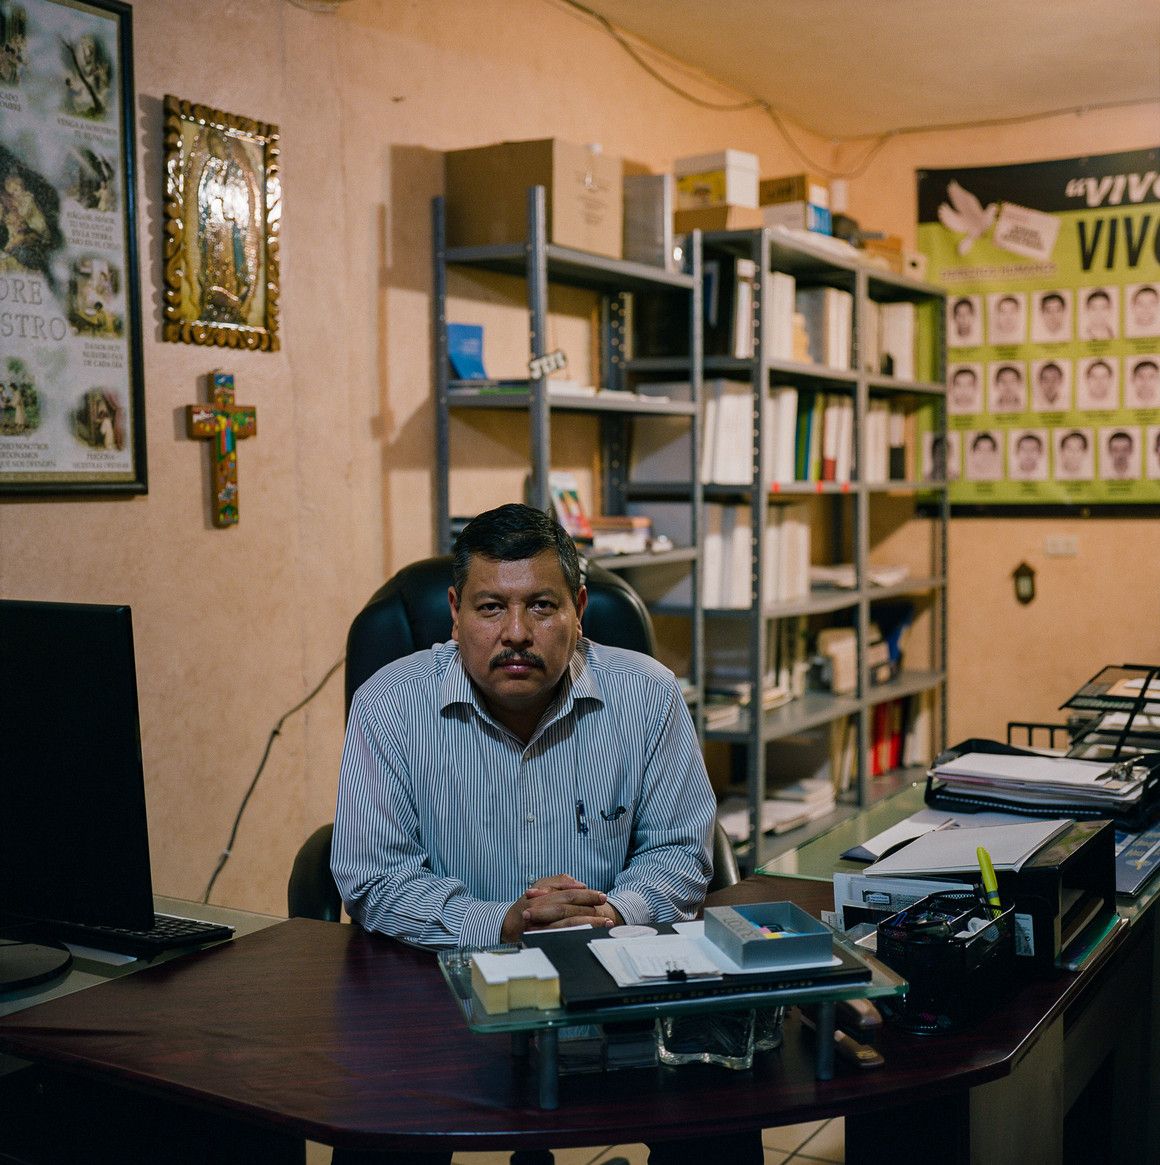 Raymundo Ramos Vázquez, the director of the Human Rights Committee of Nuevo Laredo, inside of his office. Image by by Christopher Lee. Mexico, 2020.